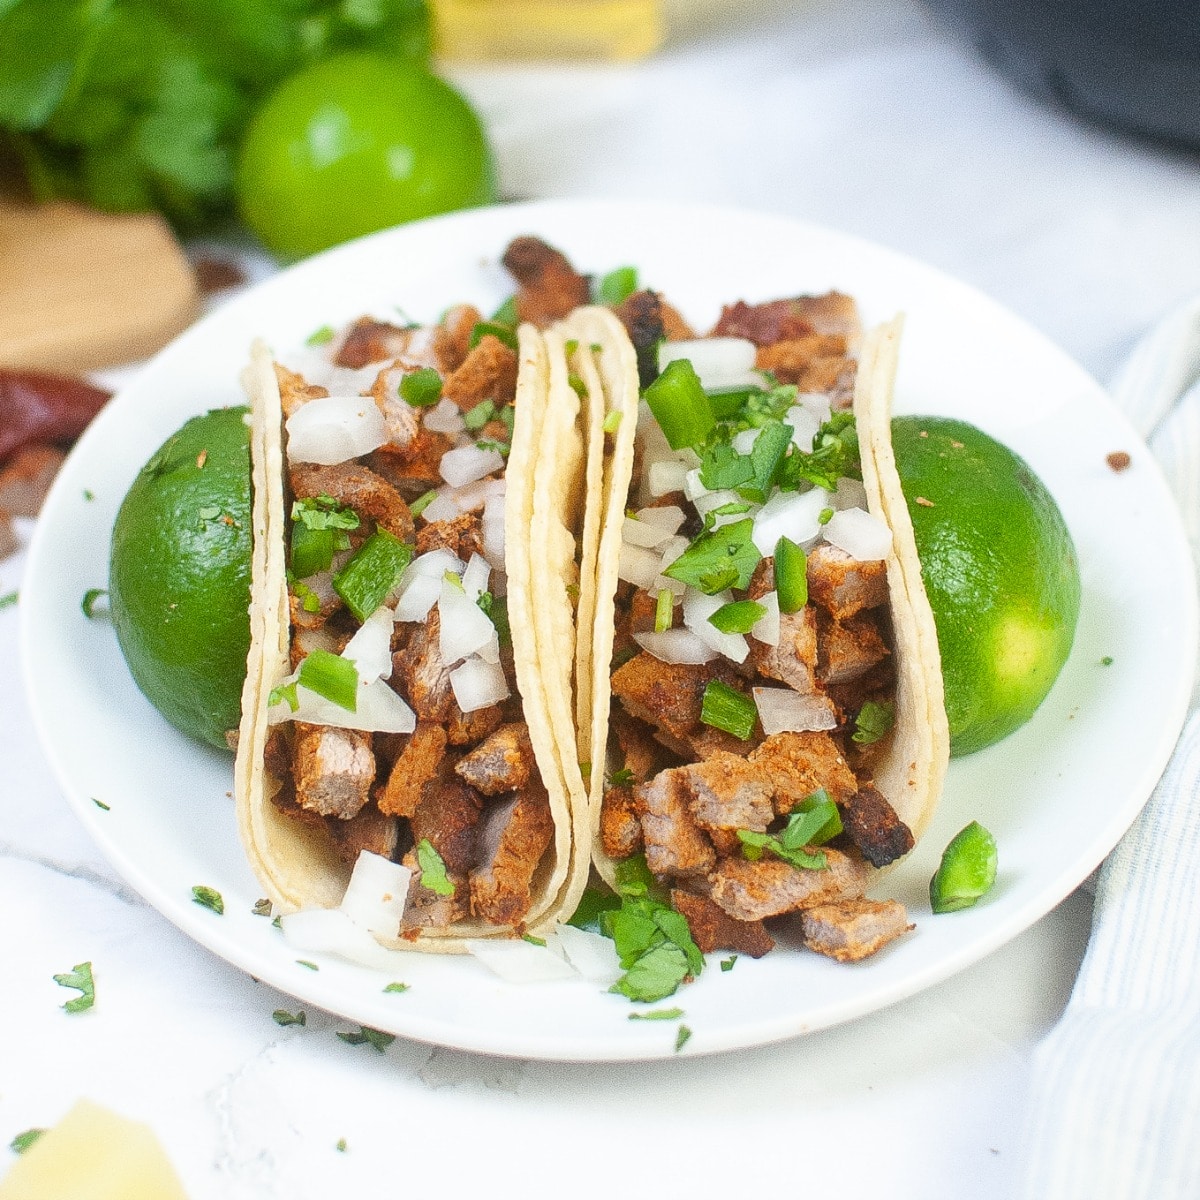 https://www.thefoodieaffair.com/wp-content/uploads/2023/02/Spicy-Pork-Tacos-1200.jpg